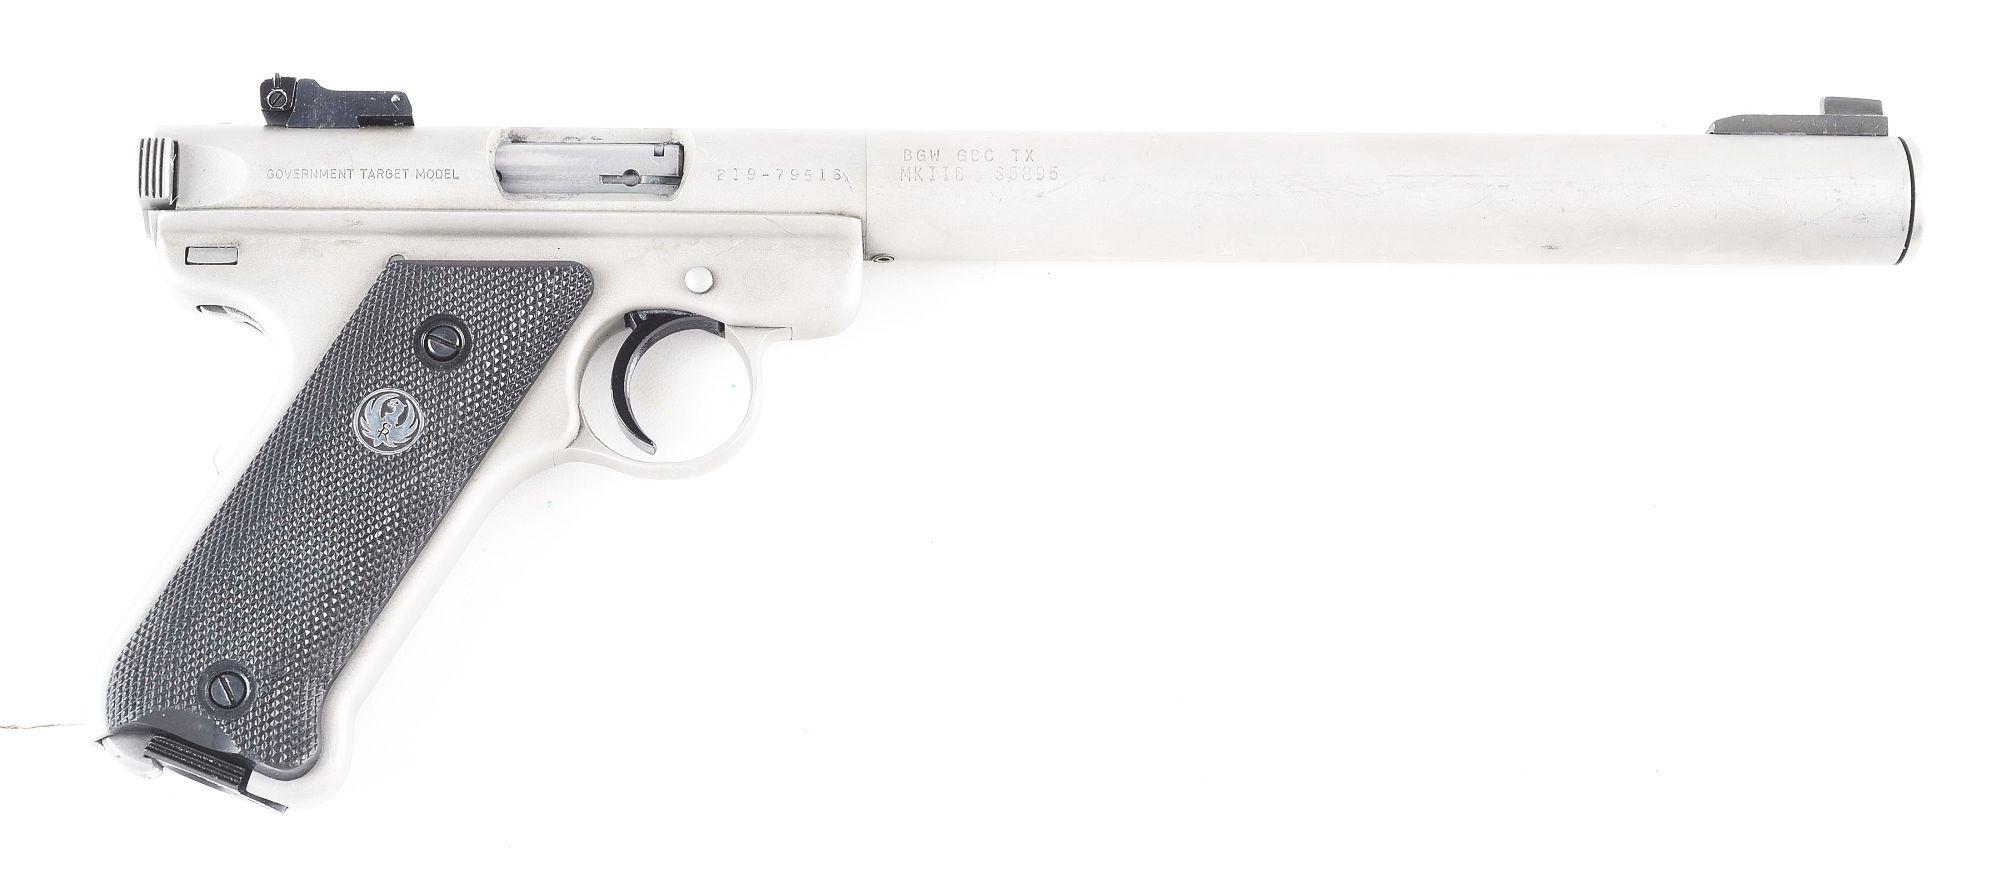 (N) ALWAYS DESIRABLE RUGER MK II GOVERNMENT TARGET MODEL SEMI-AUTOMATIC PISTOL WITH INTEGRAL BLAYLOC